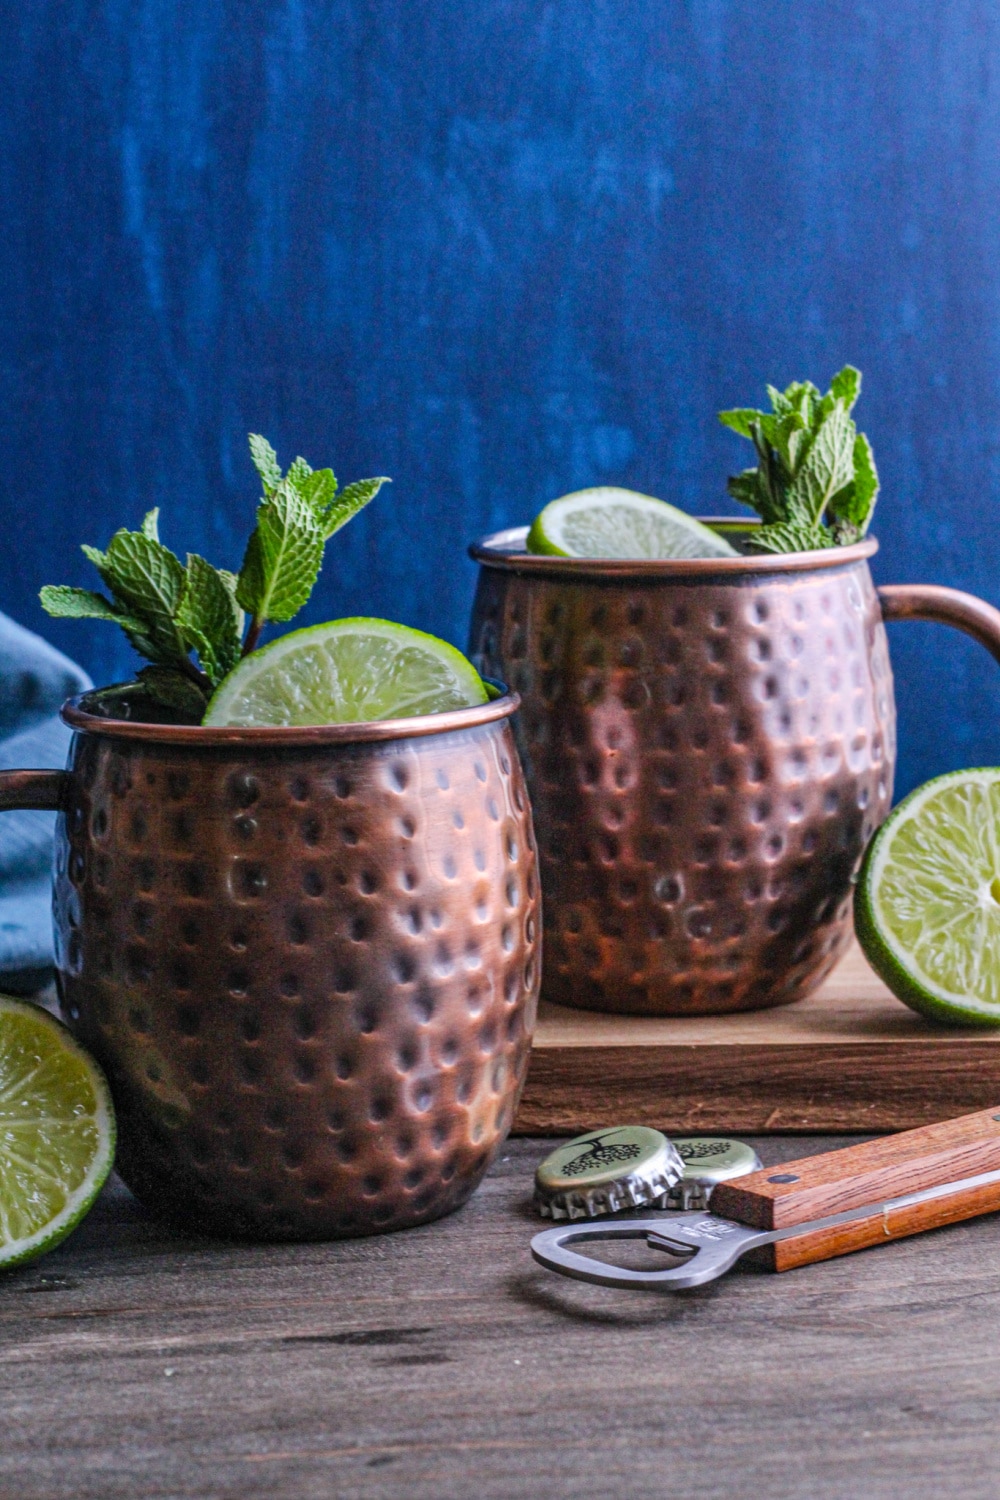 Two Moscow Mules in copper mugs with limes and a bottle opener in the foreground.